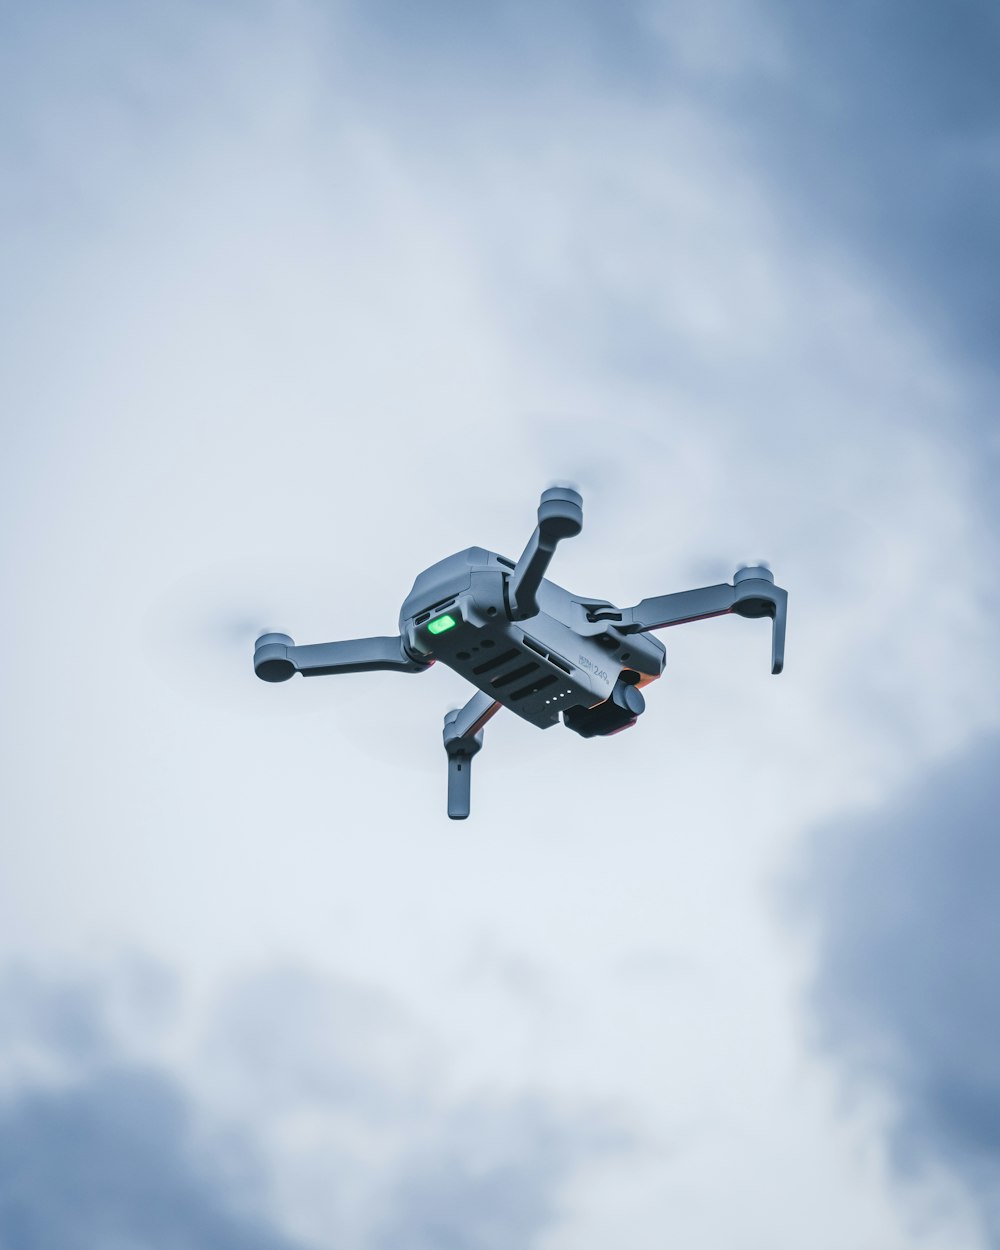 green and black drone flying under white clouds during daytime